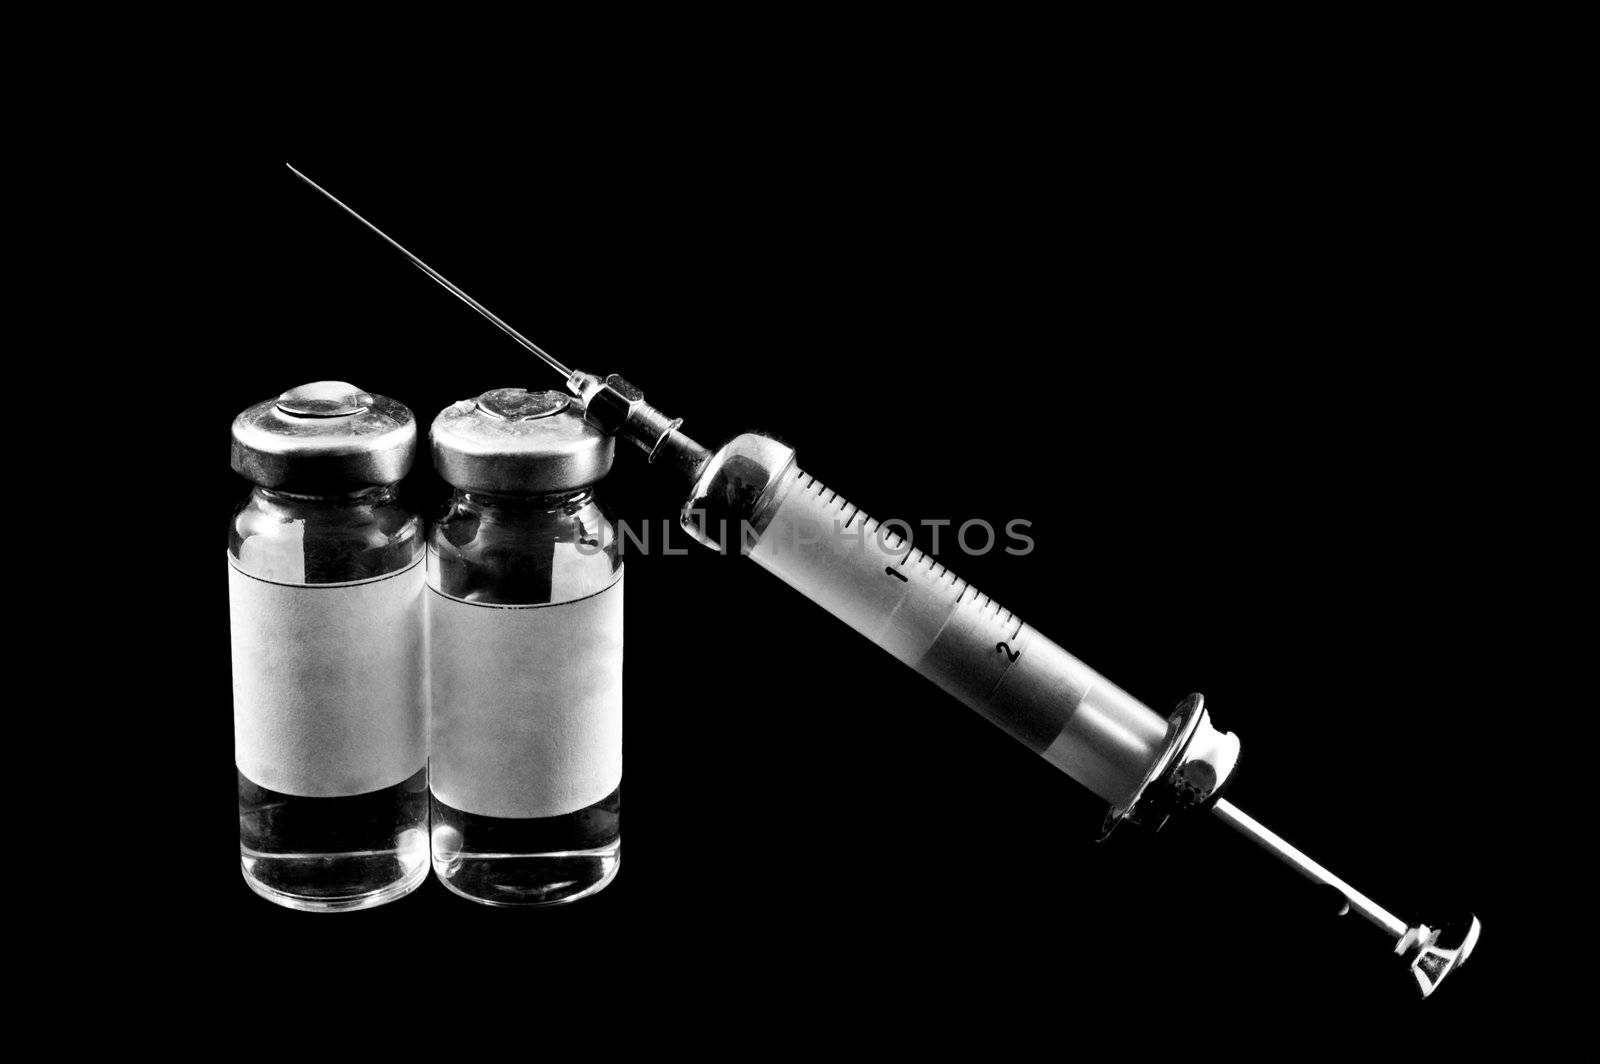 syringe and medicaments on a black backgroun  by galcka